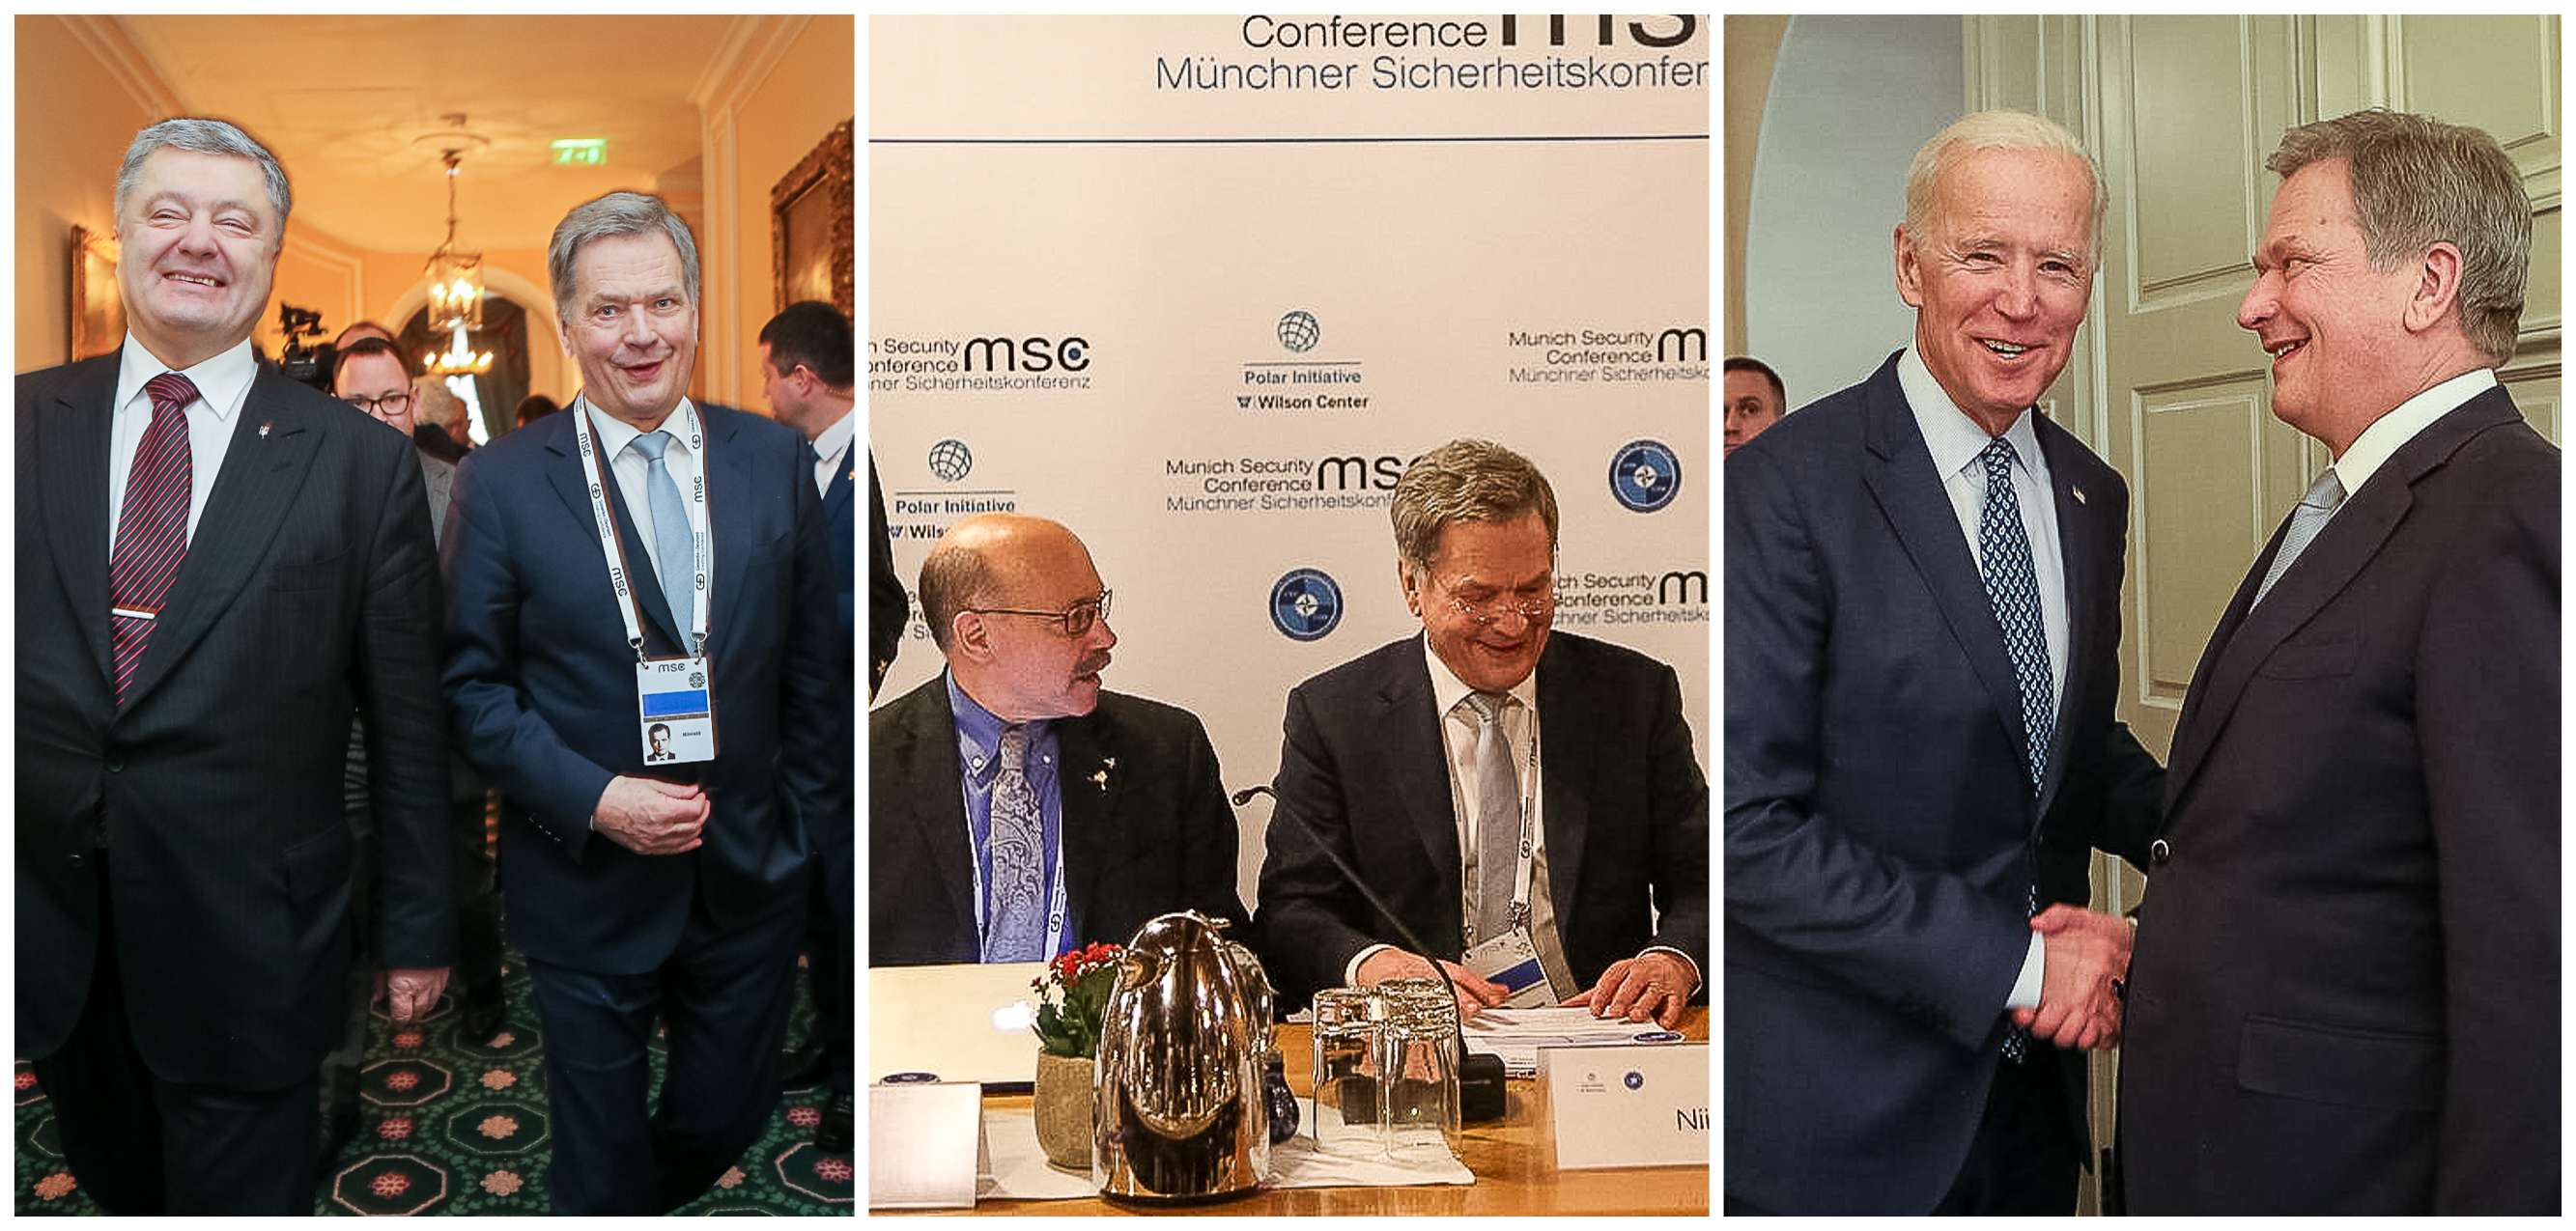 At the Munich Security Conference, President Niinistö met with, among others, the President of Ukraine Petro Poroshenko (left) and former Vice President of the United States Joe Biden. Photo: Katri Makkonen/Office of the President of the Republic of Finland